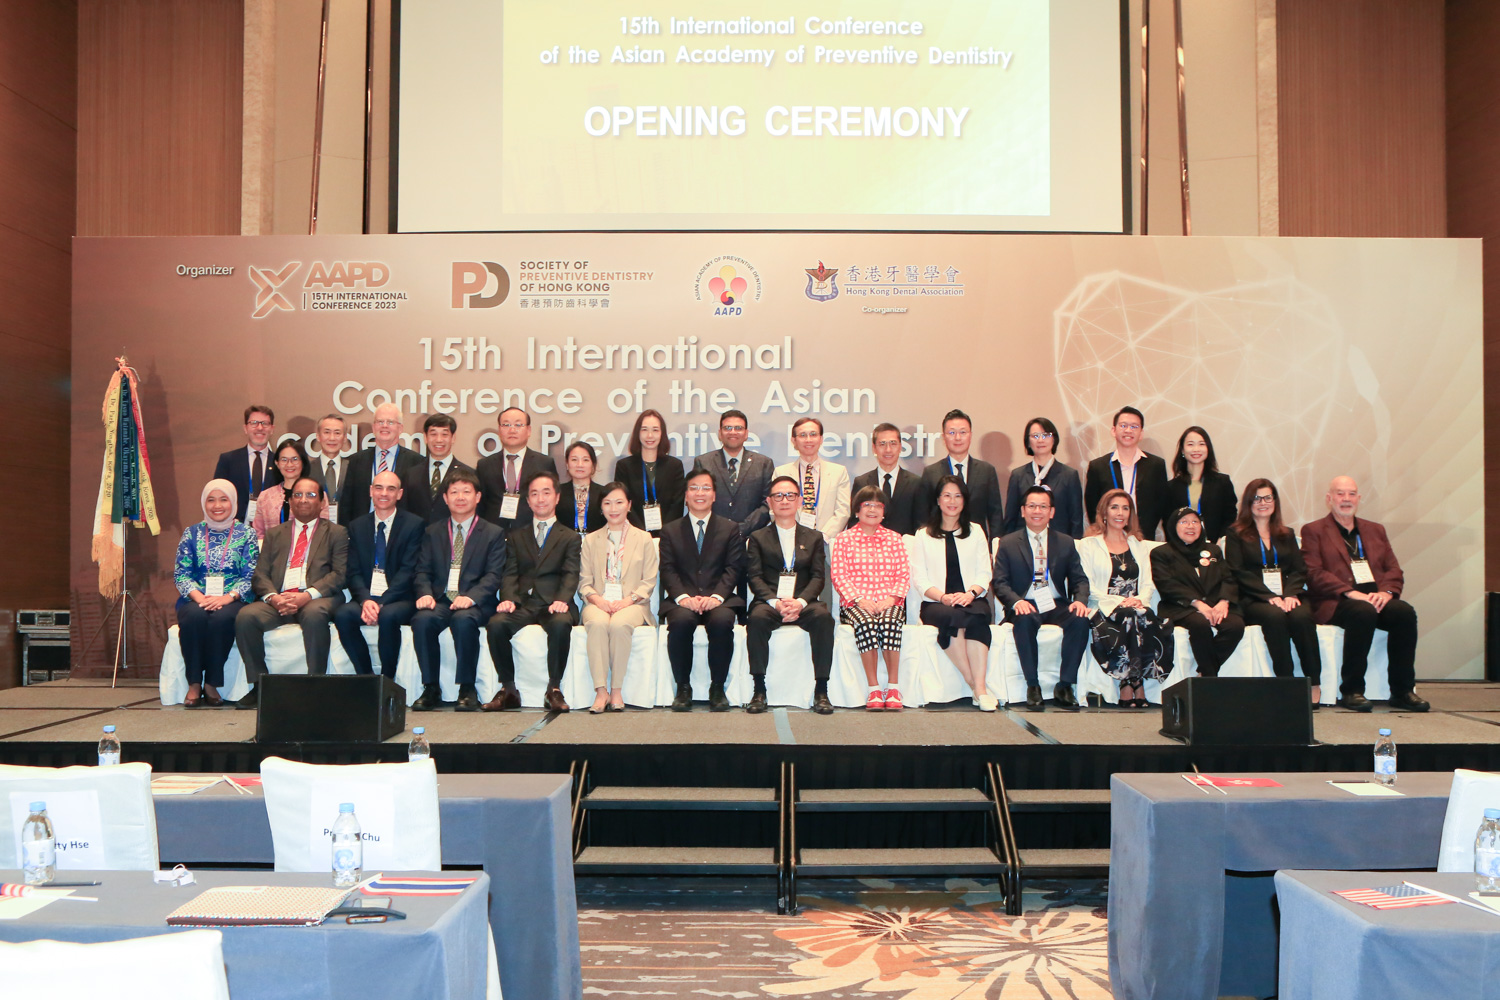 The 15th International Conference of the Asia Academy of Preventive Dentistry